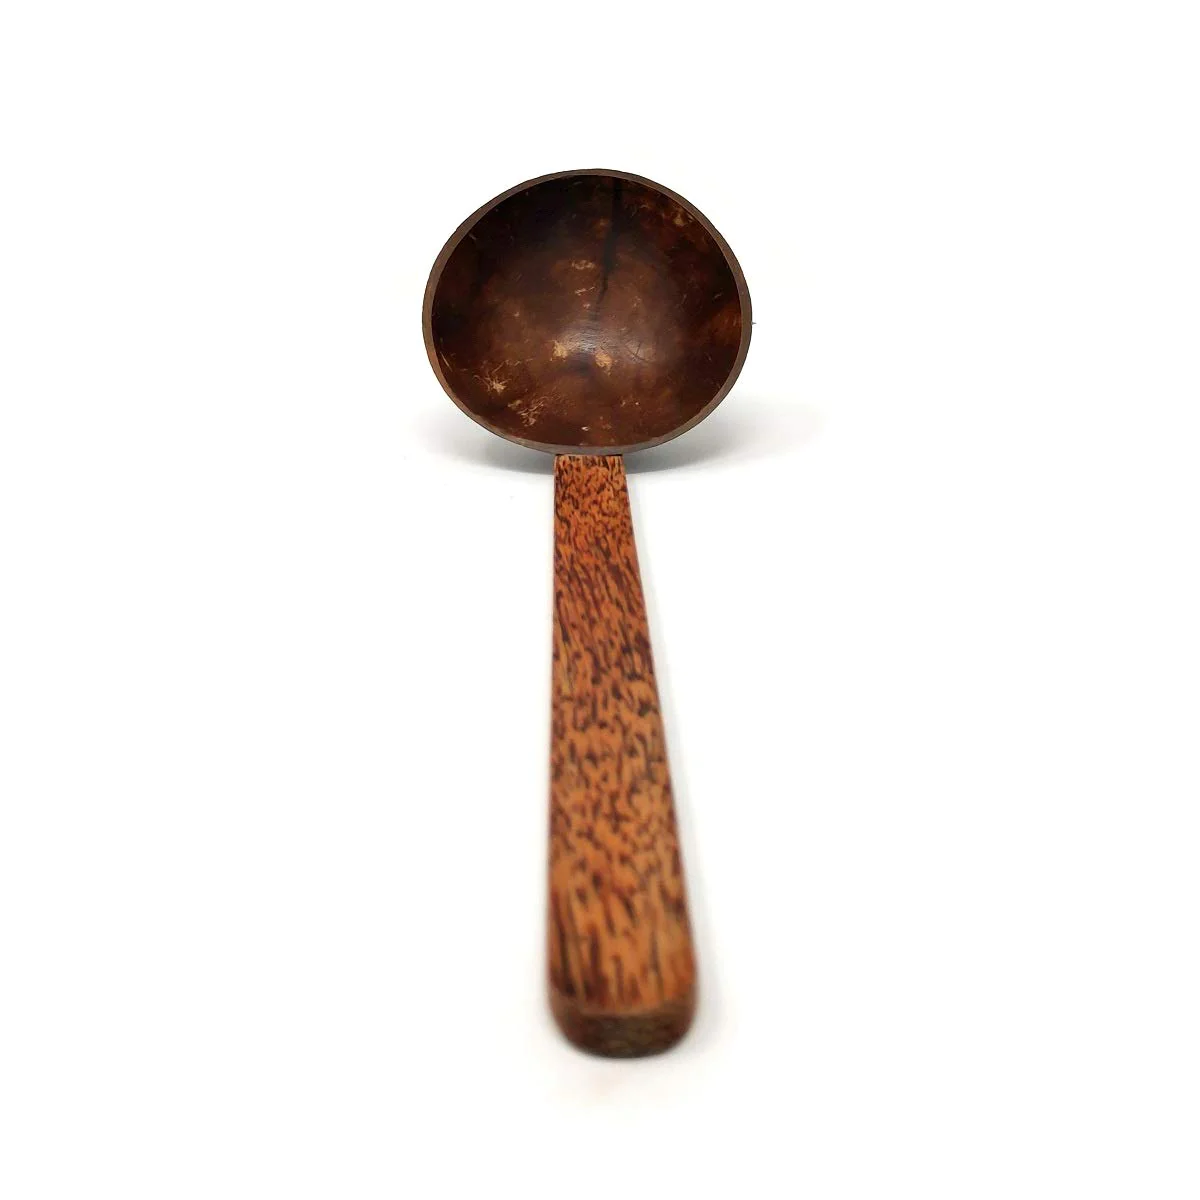 Ecocraft India Coconut Ladle Medium – Hand Made – Made from Coconut Shell and Coconut Wood